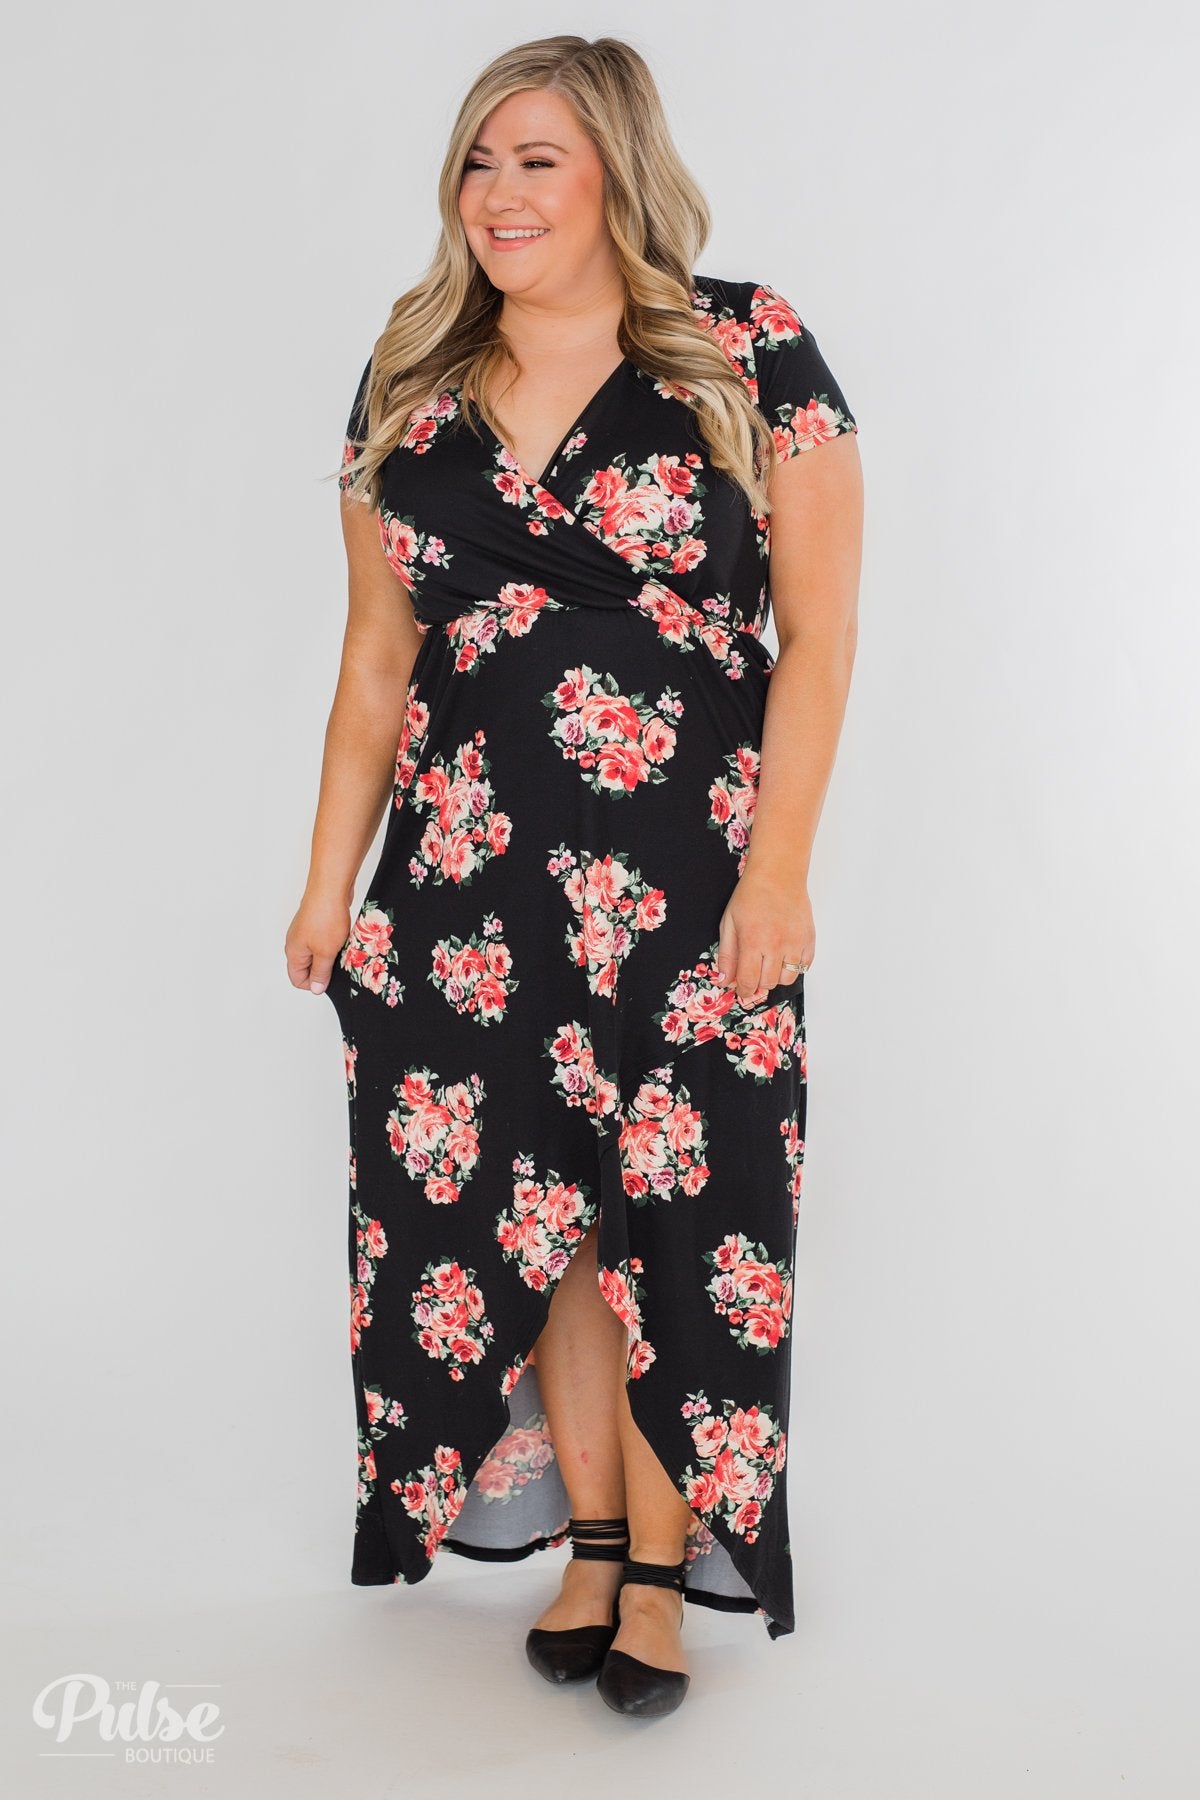 Still Into You Short Sleeve Floral Maxi Dress- Black – The Pulse Boutique